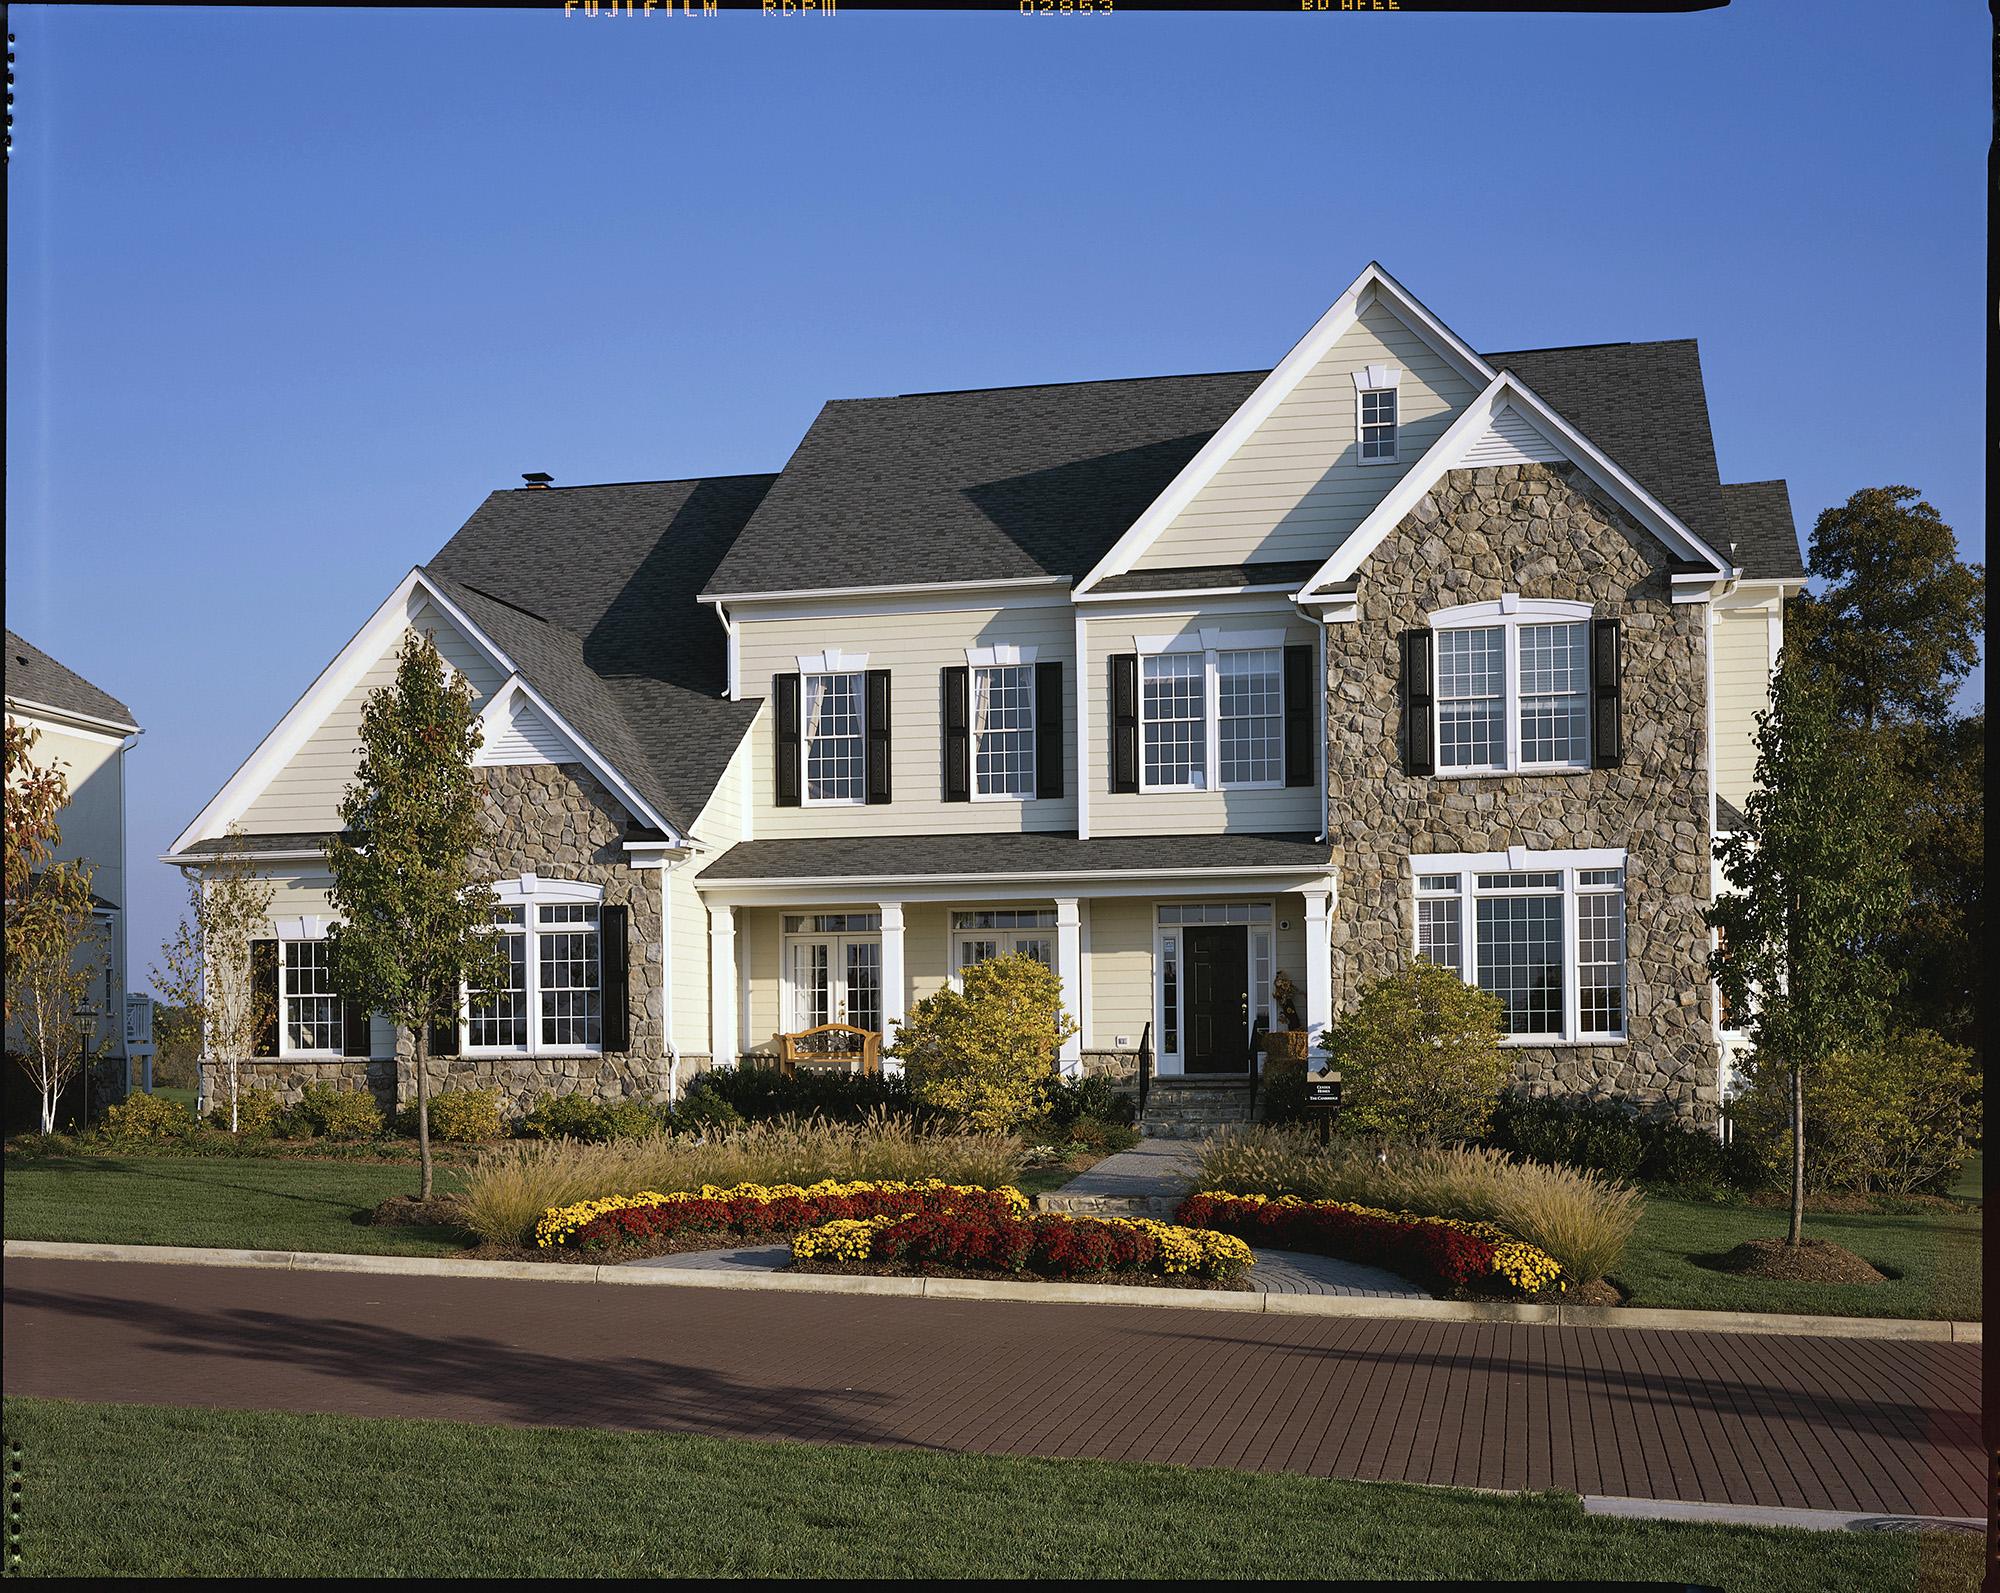 Cover Up Construction - Siding - A house with nice stone installation also needs durable and asthetic siding.